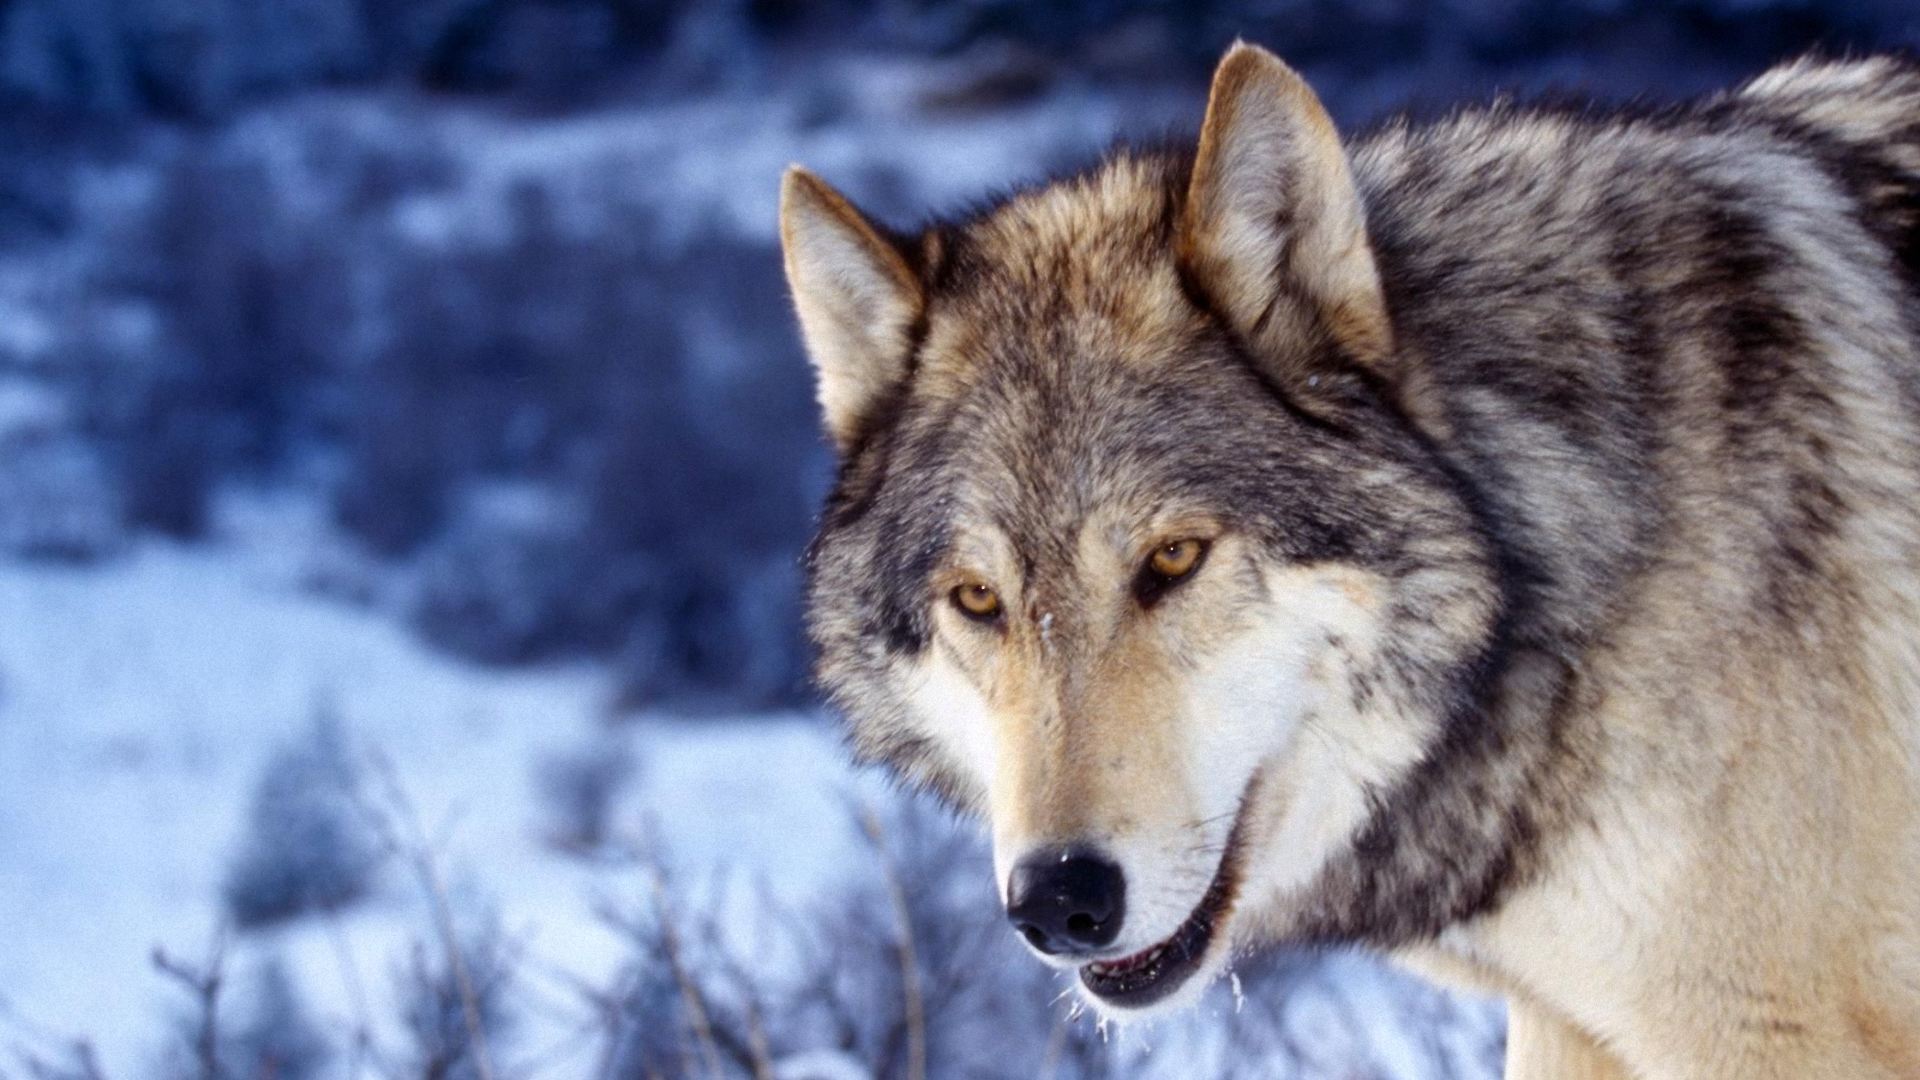 Wolf Face 1920x1080 WallpapersWolf 1920x1080 Wallpapers Pictures